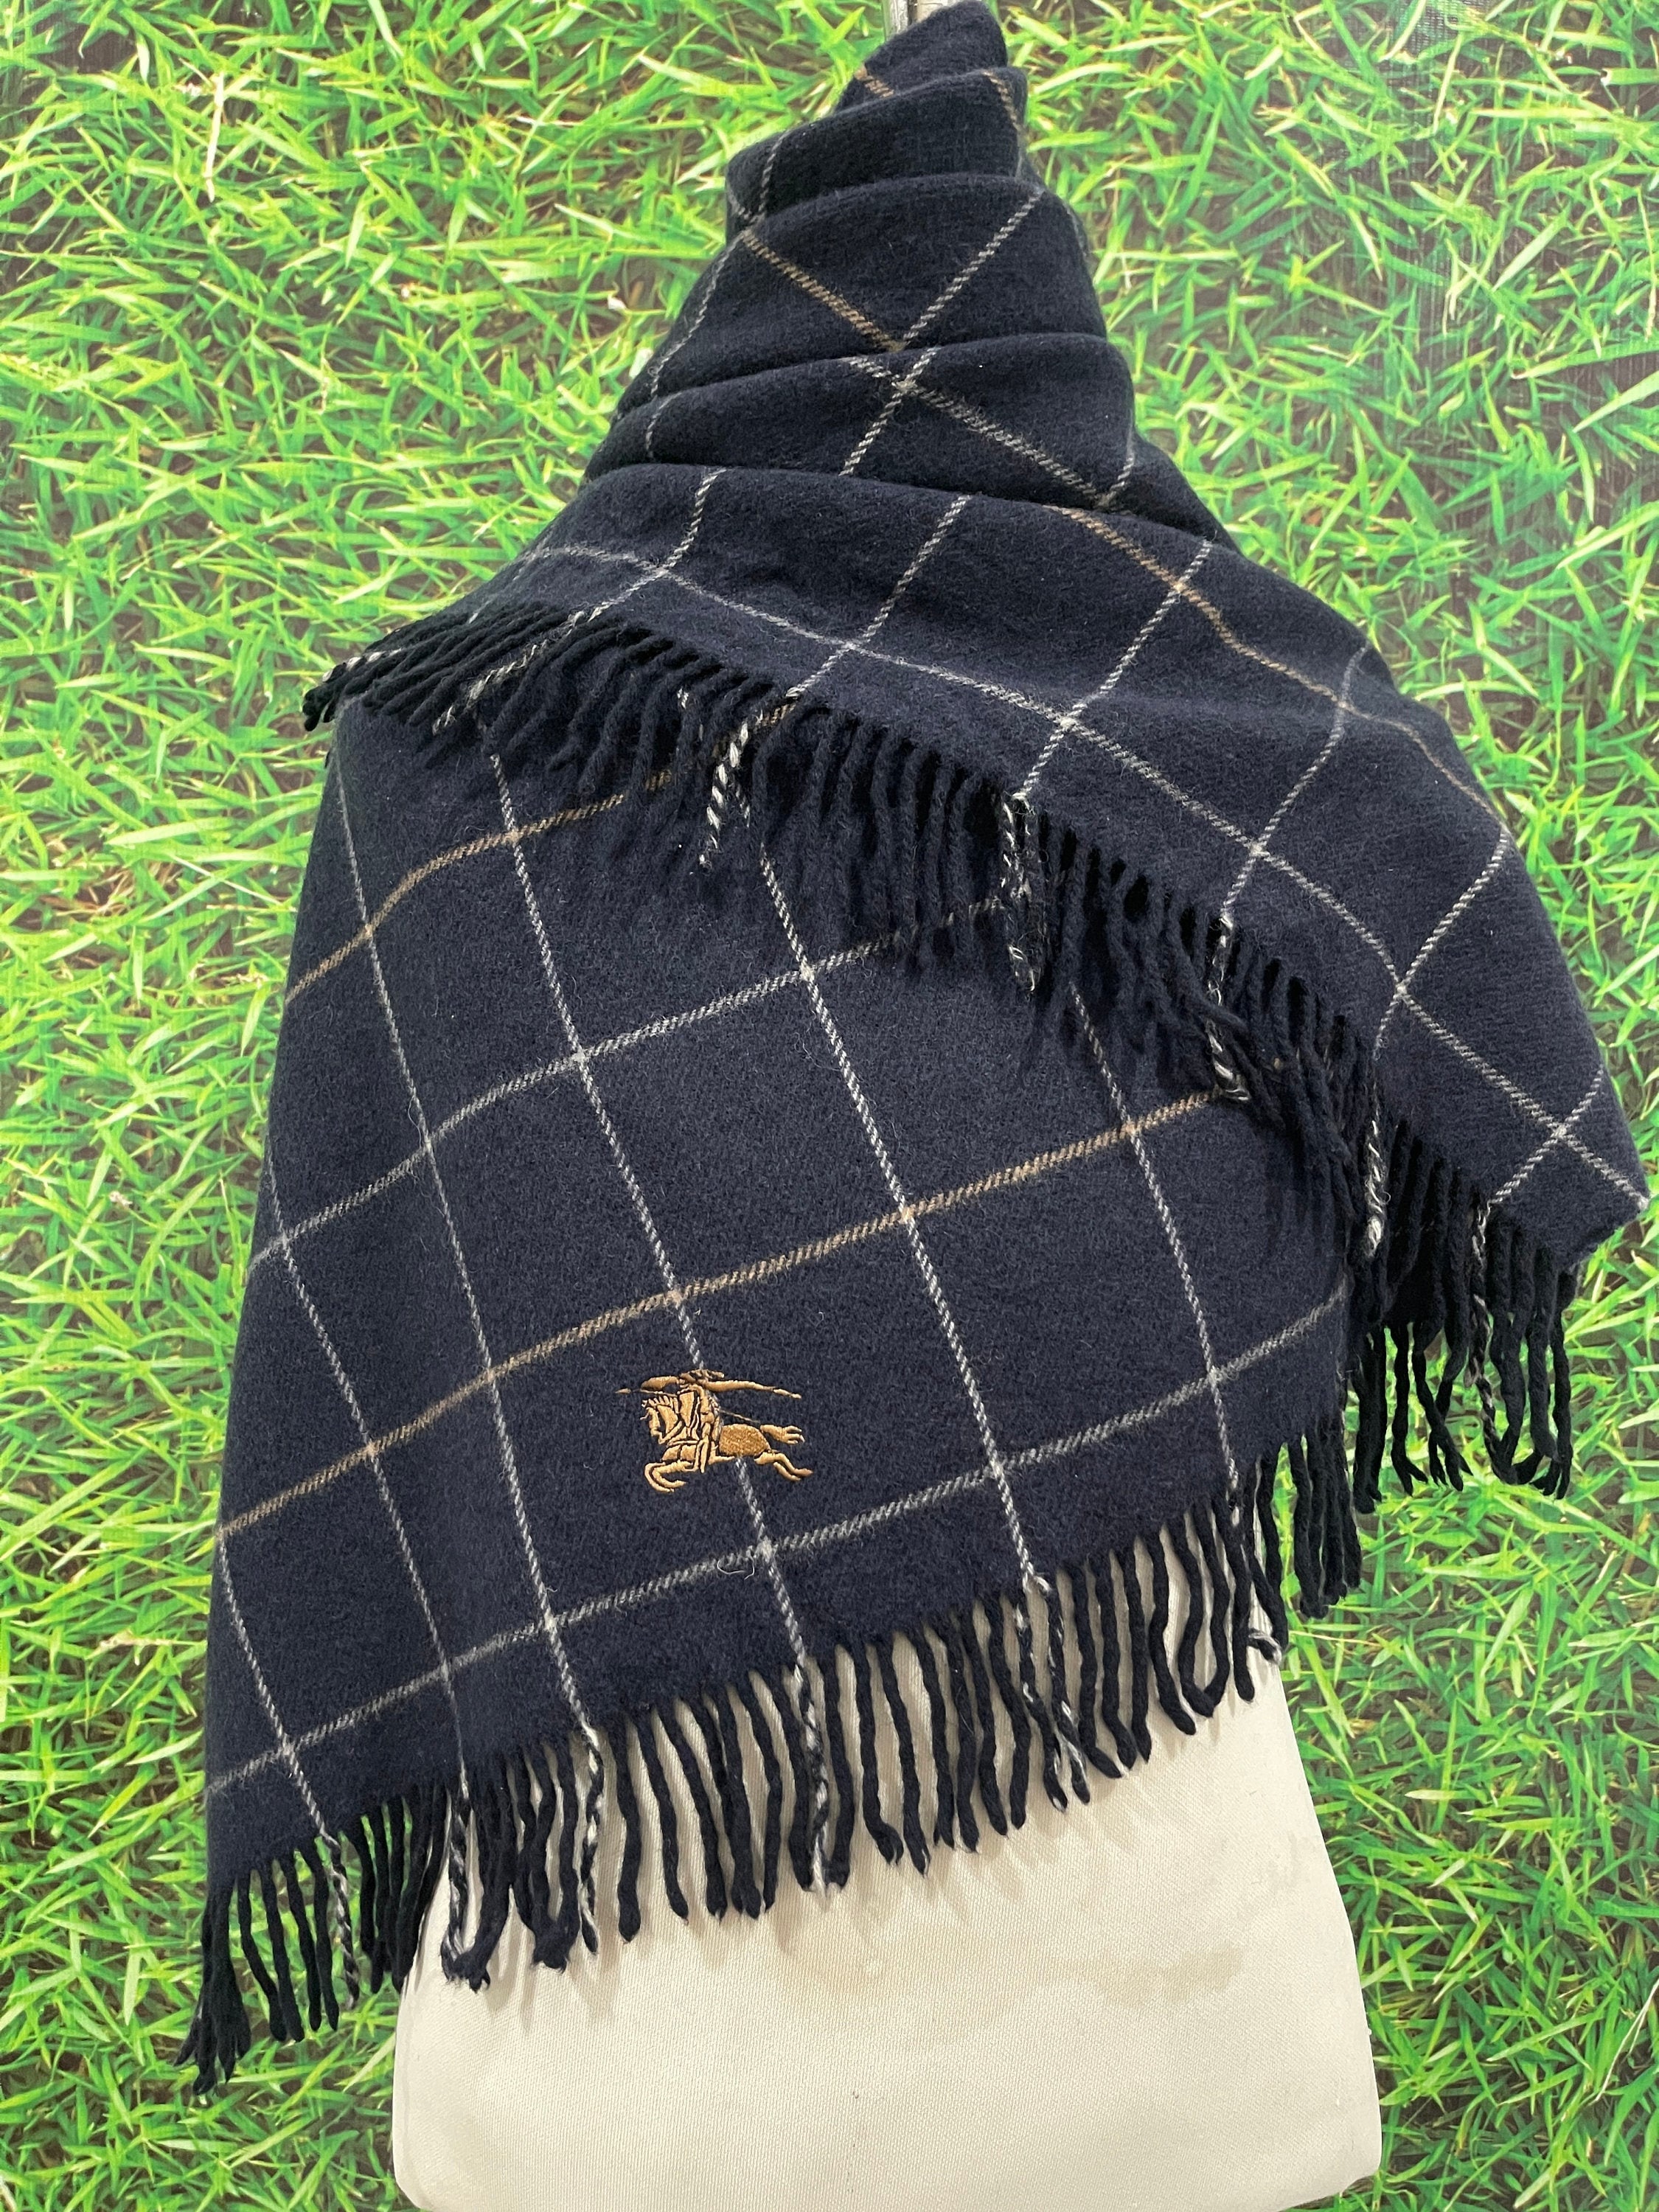 Burberry London Pure New Wool Big Embroidery Scarf - Etsy